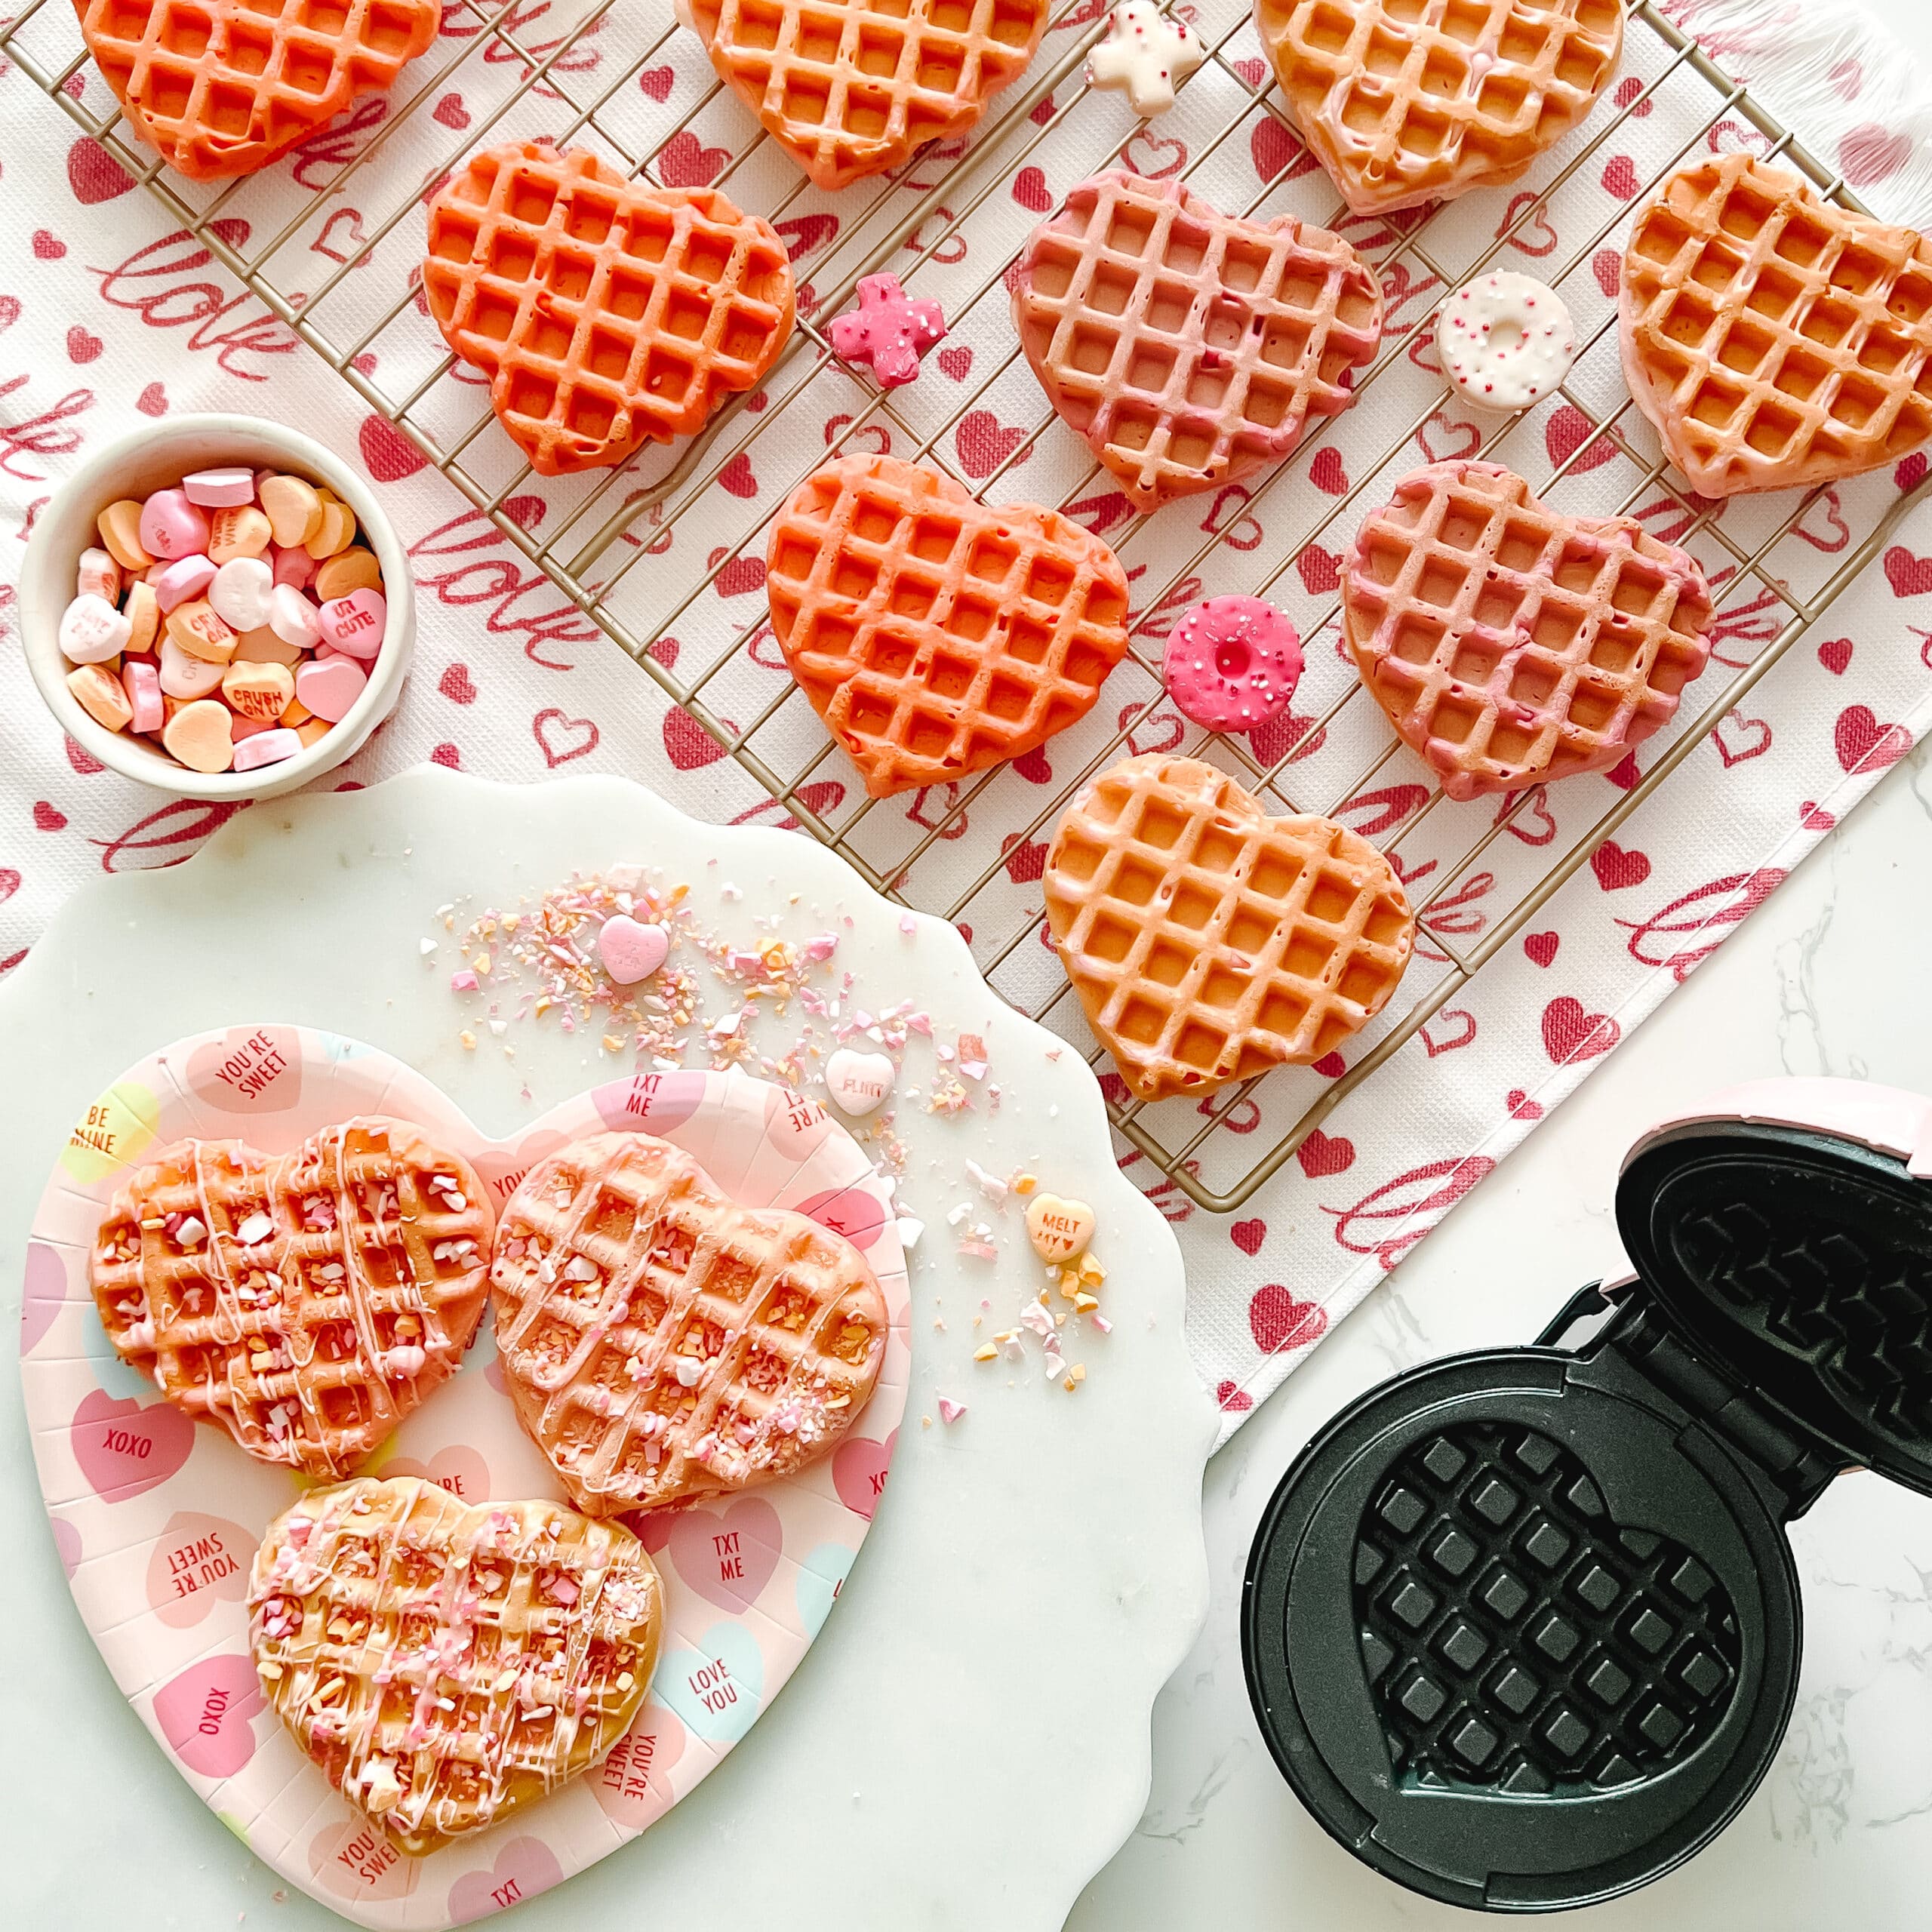 Pink Heart Shaped Waffles by Dash